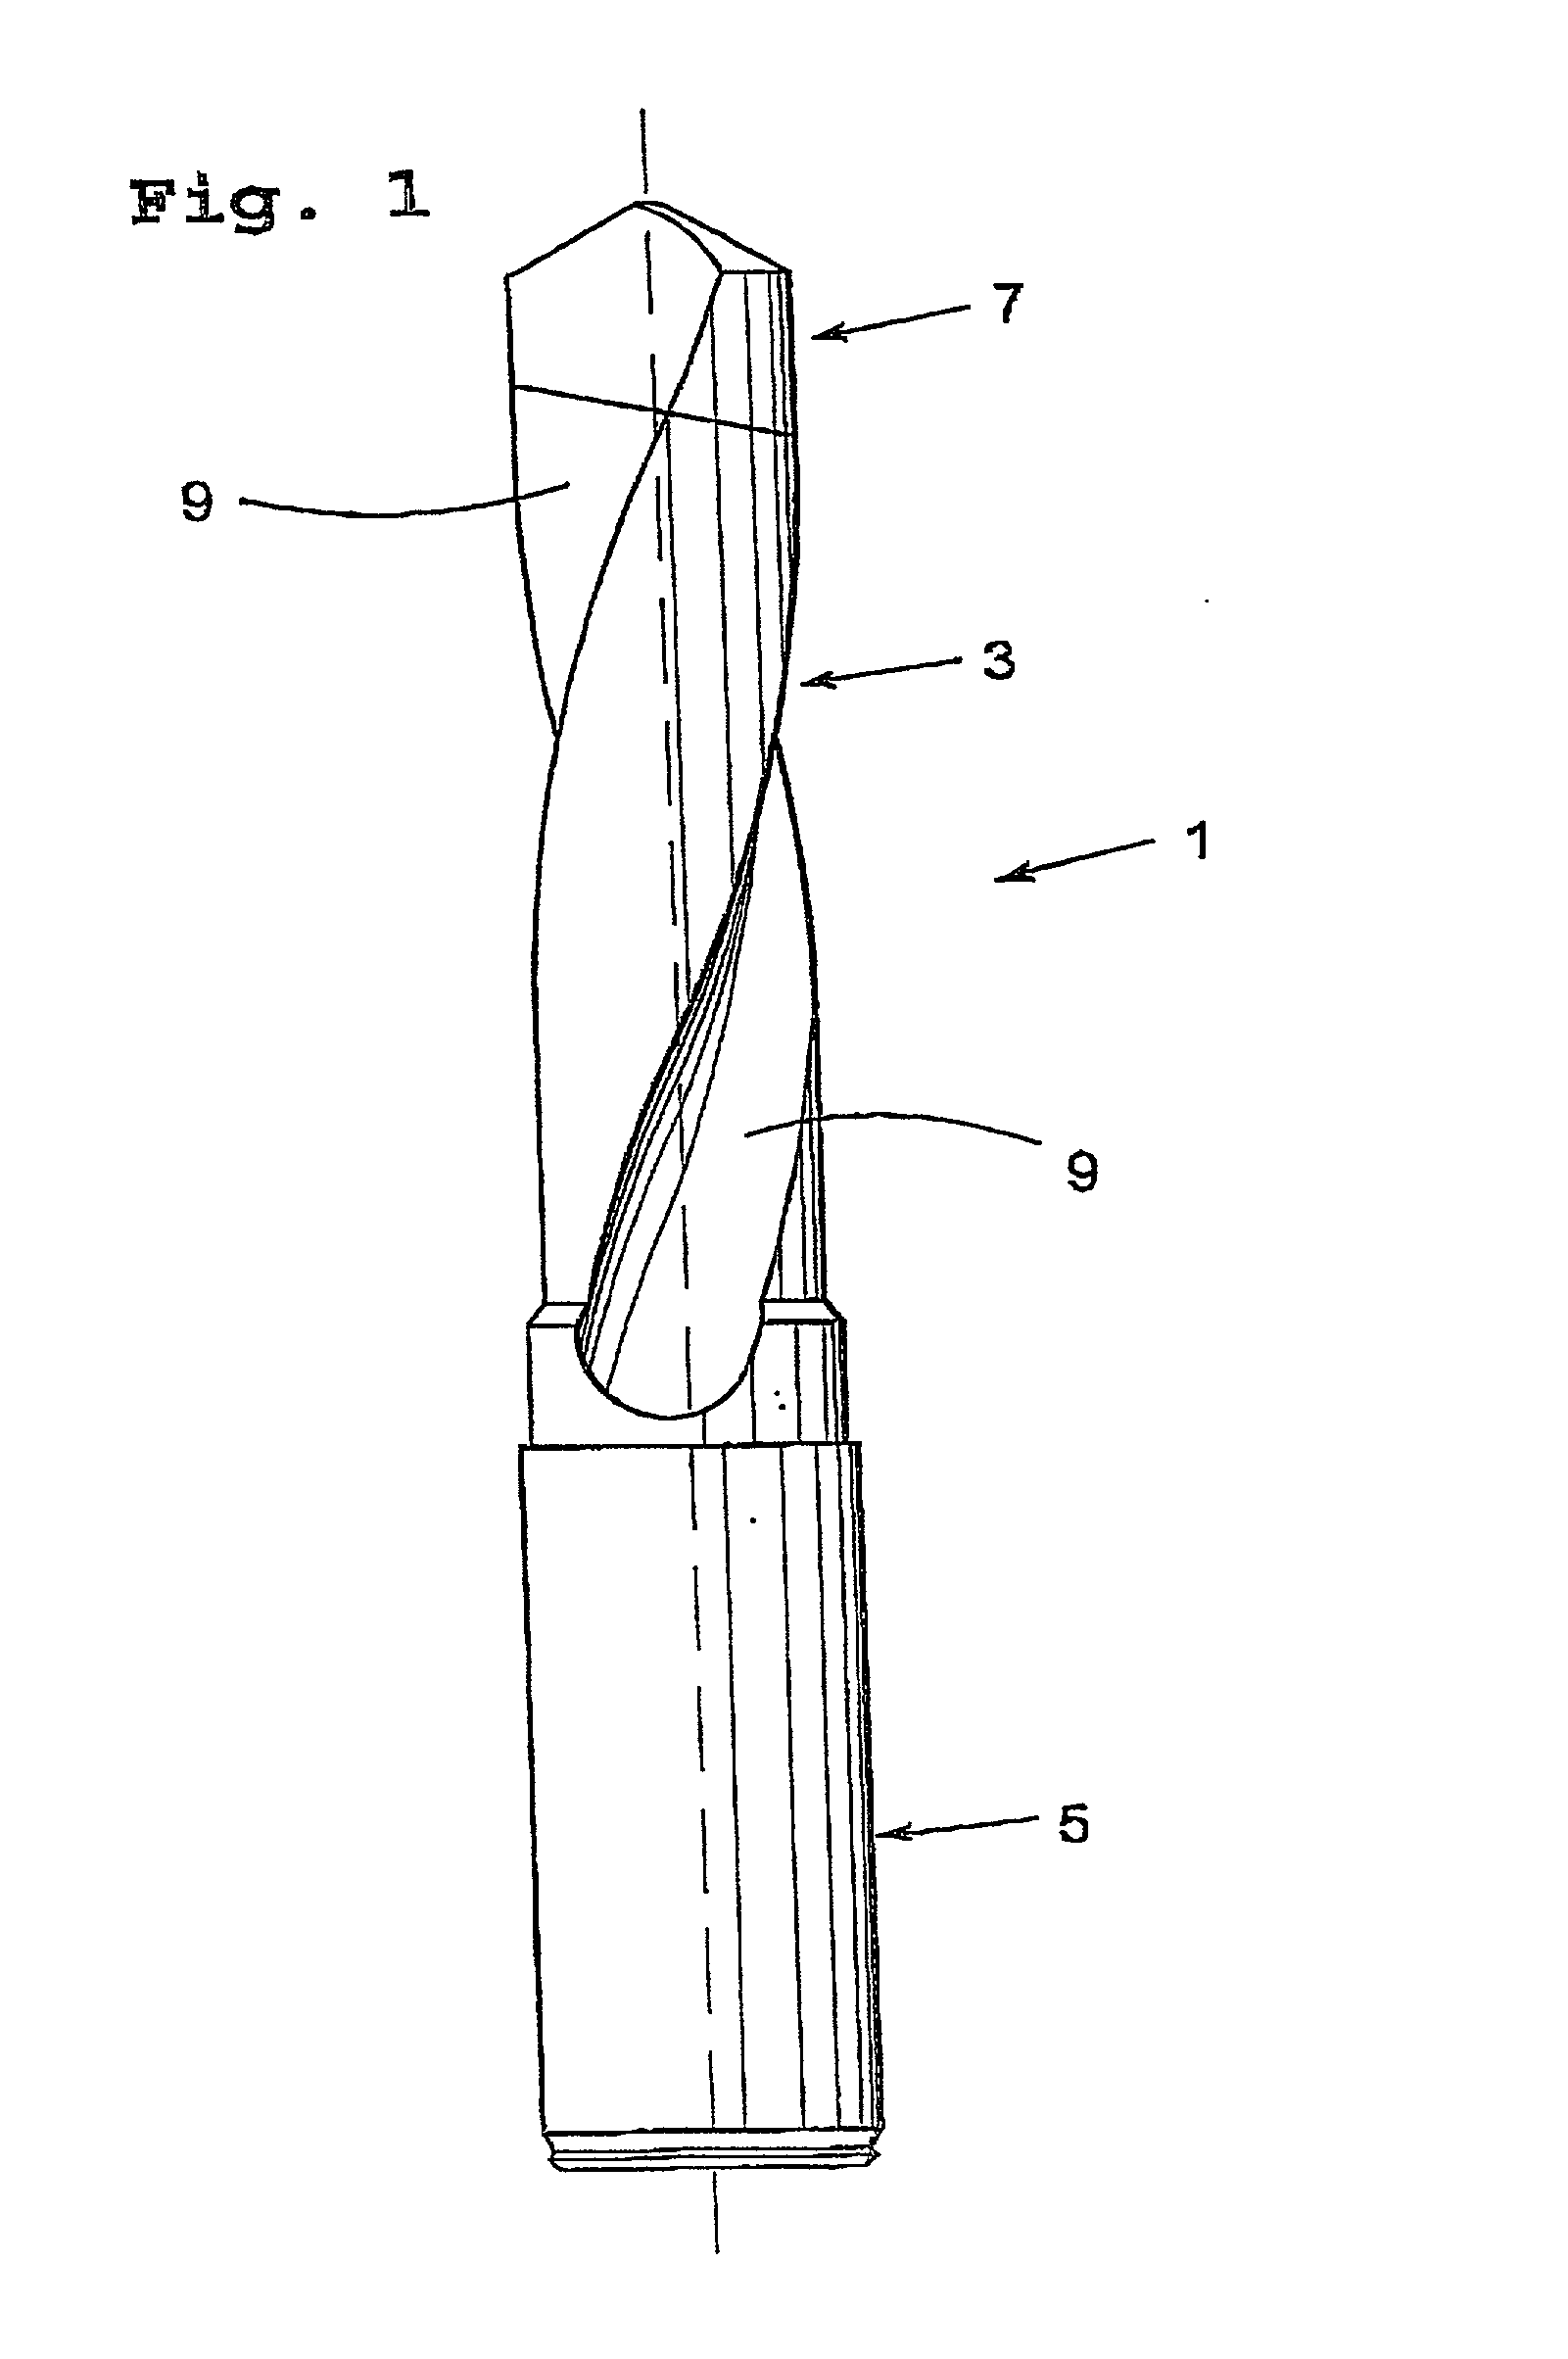 Rotatable tool having a replaceable cutting tip secured by a dovetail coupling